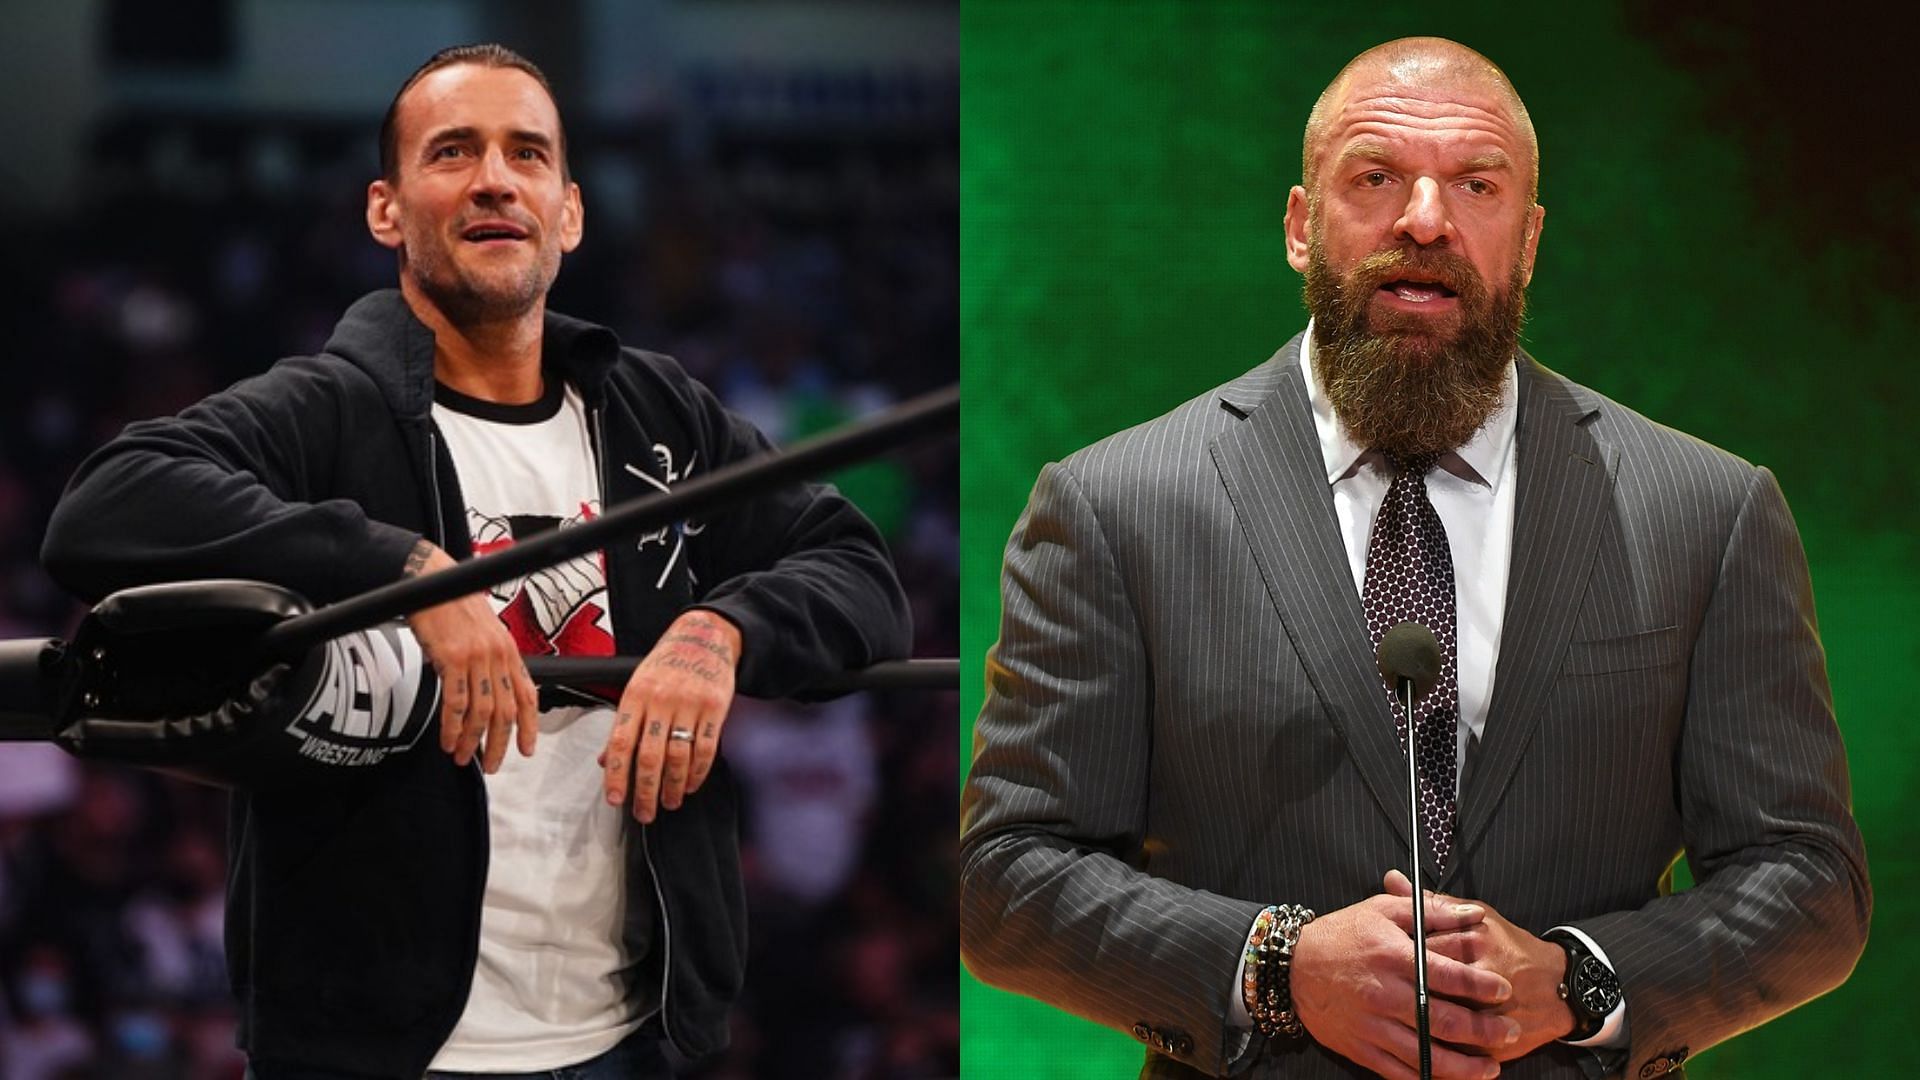 Could this be how CM Punk secures his path back to WWE?